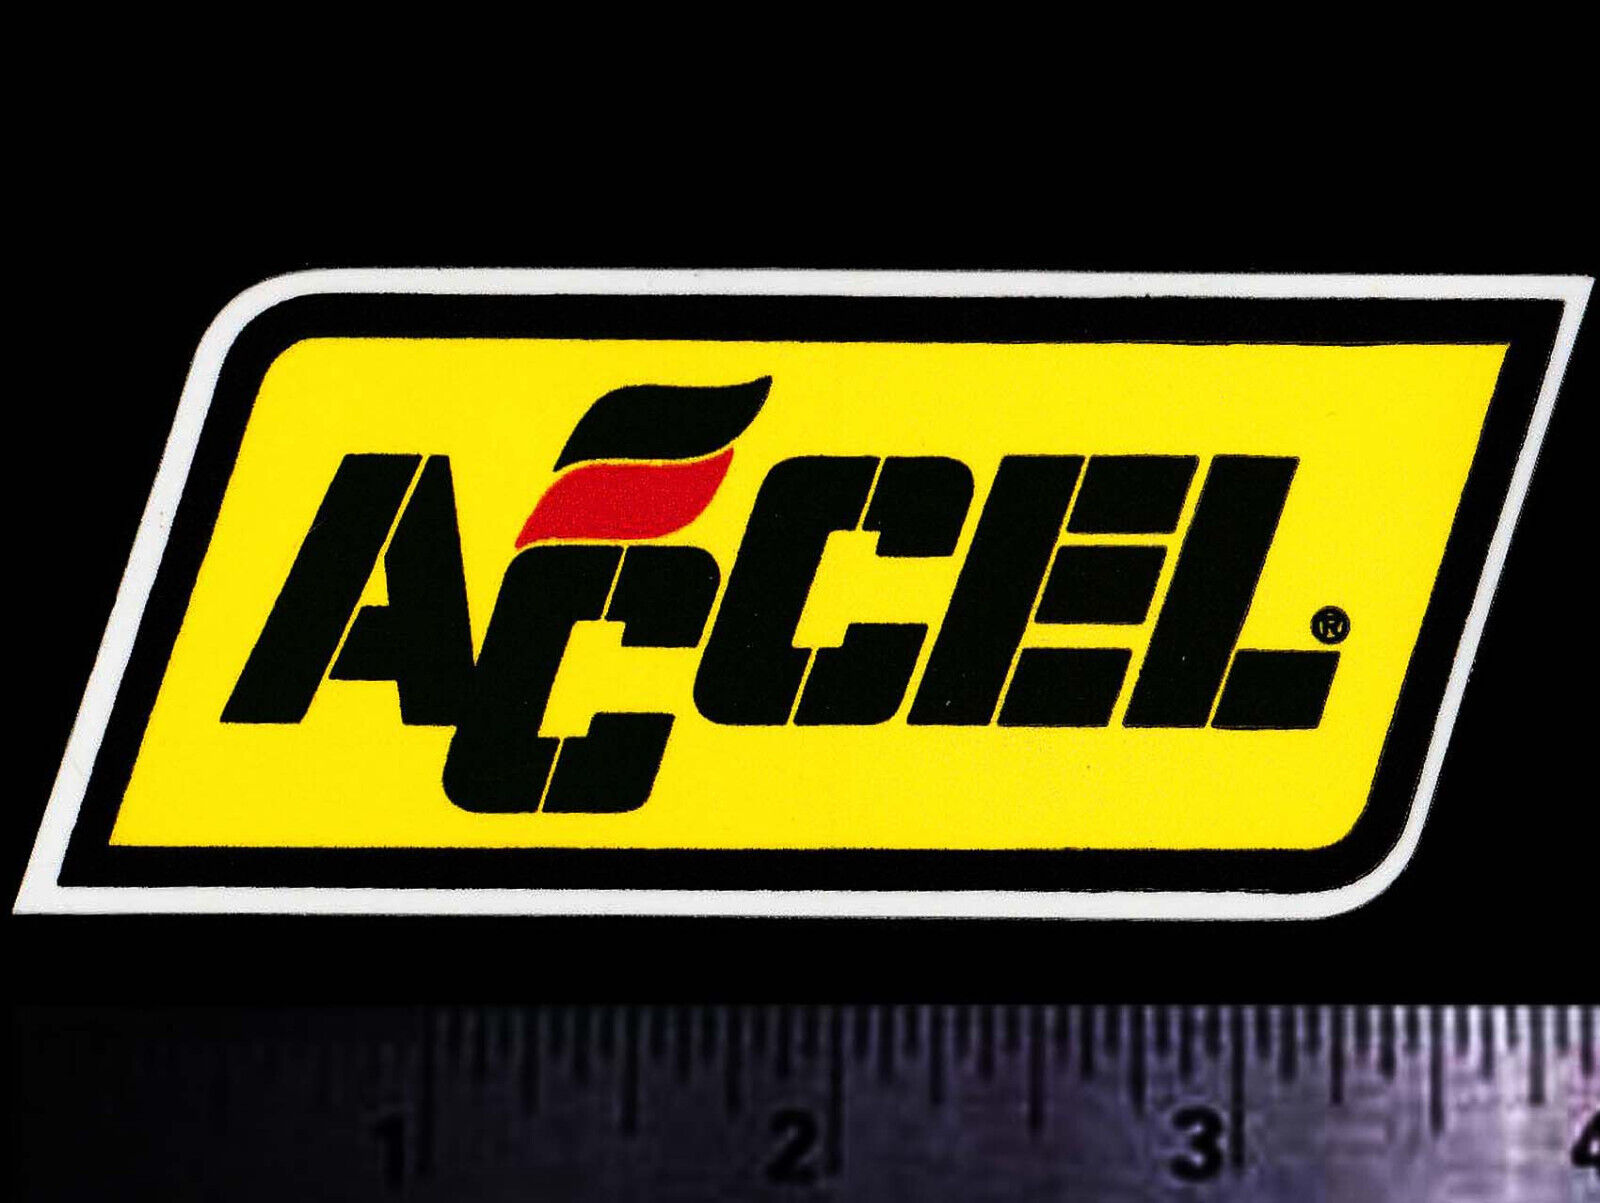 ACCEL Ignition - Original Vintage 1980’s Racing Decal/Sticker - 3.75 inch size